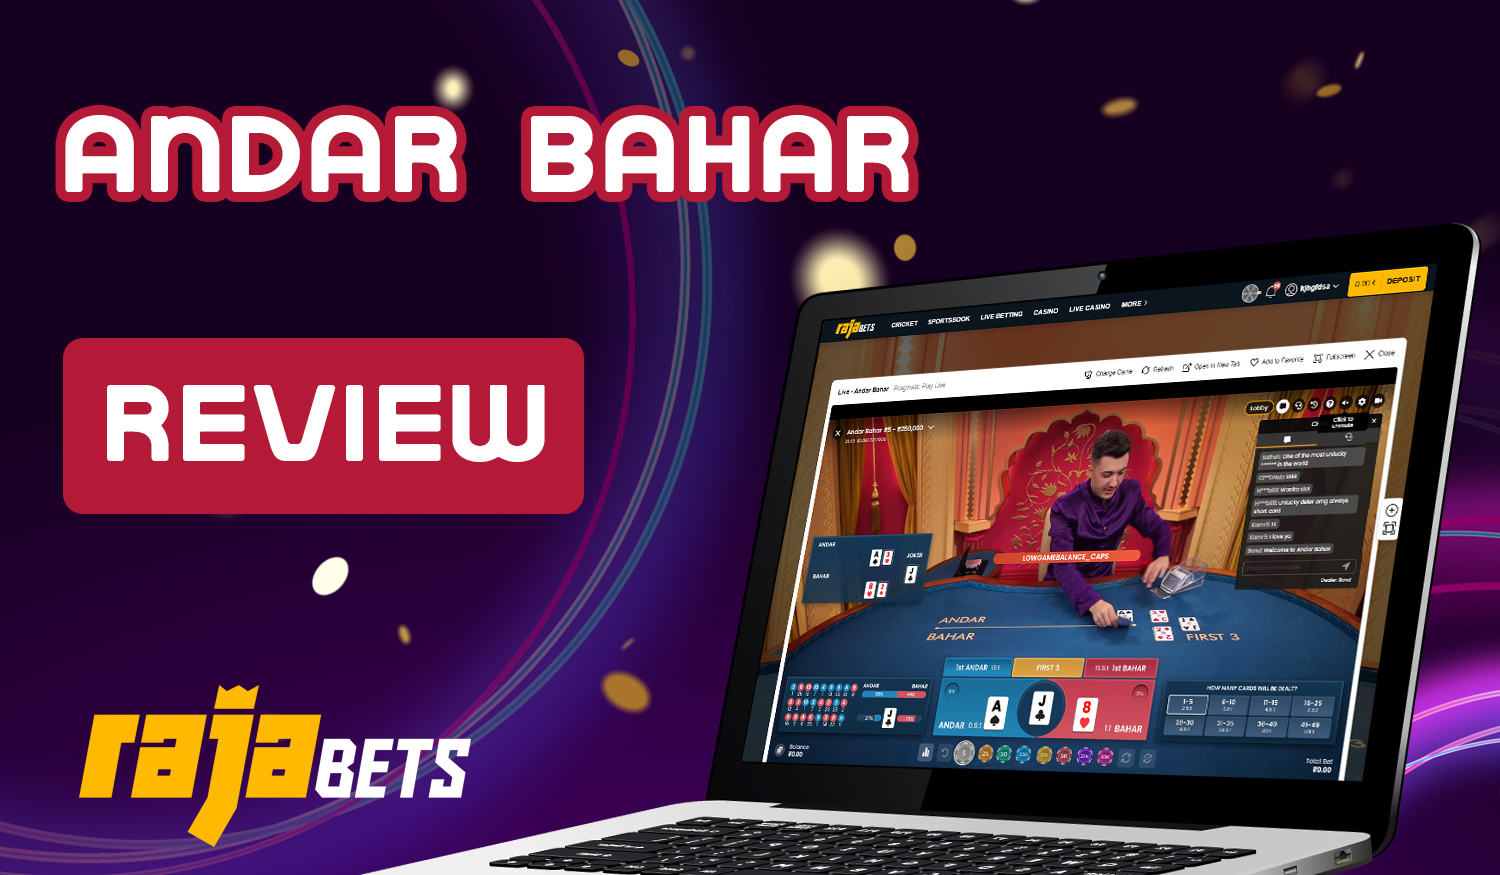 Basic game rules and payout features in the Andar Bahar game on Rajabets